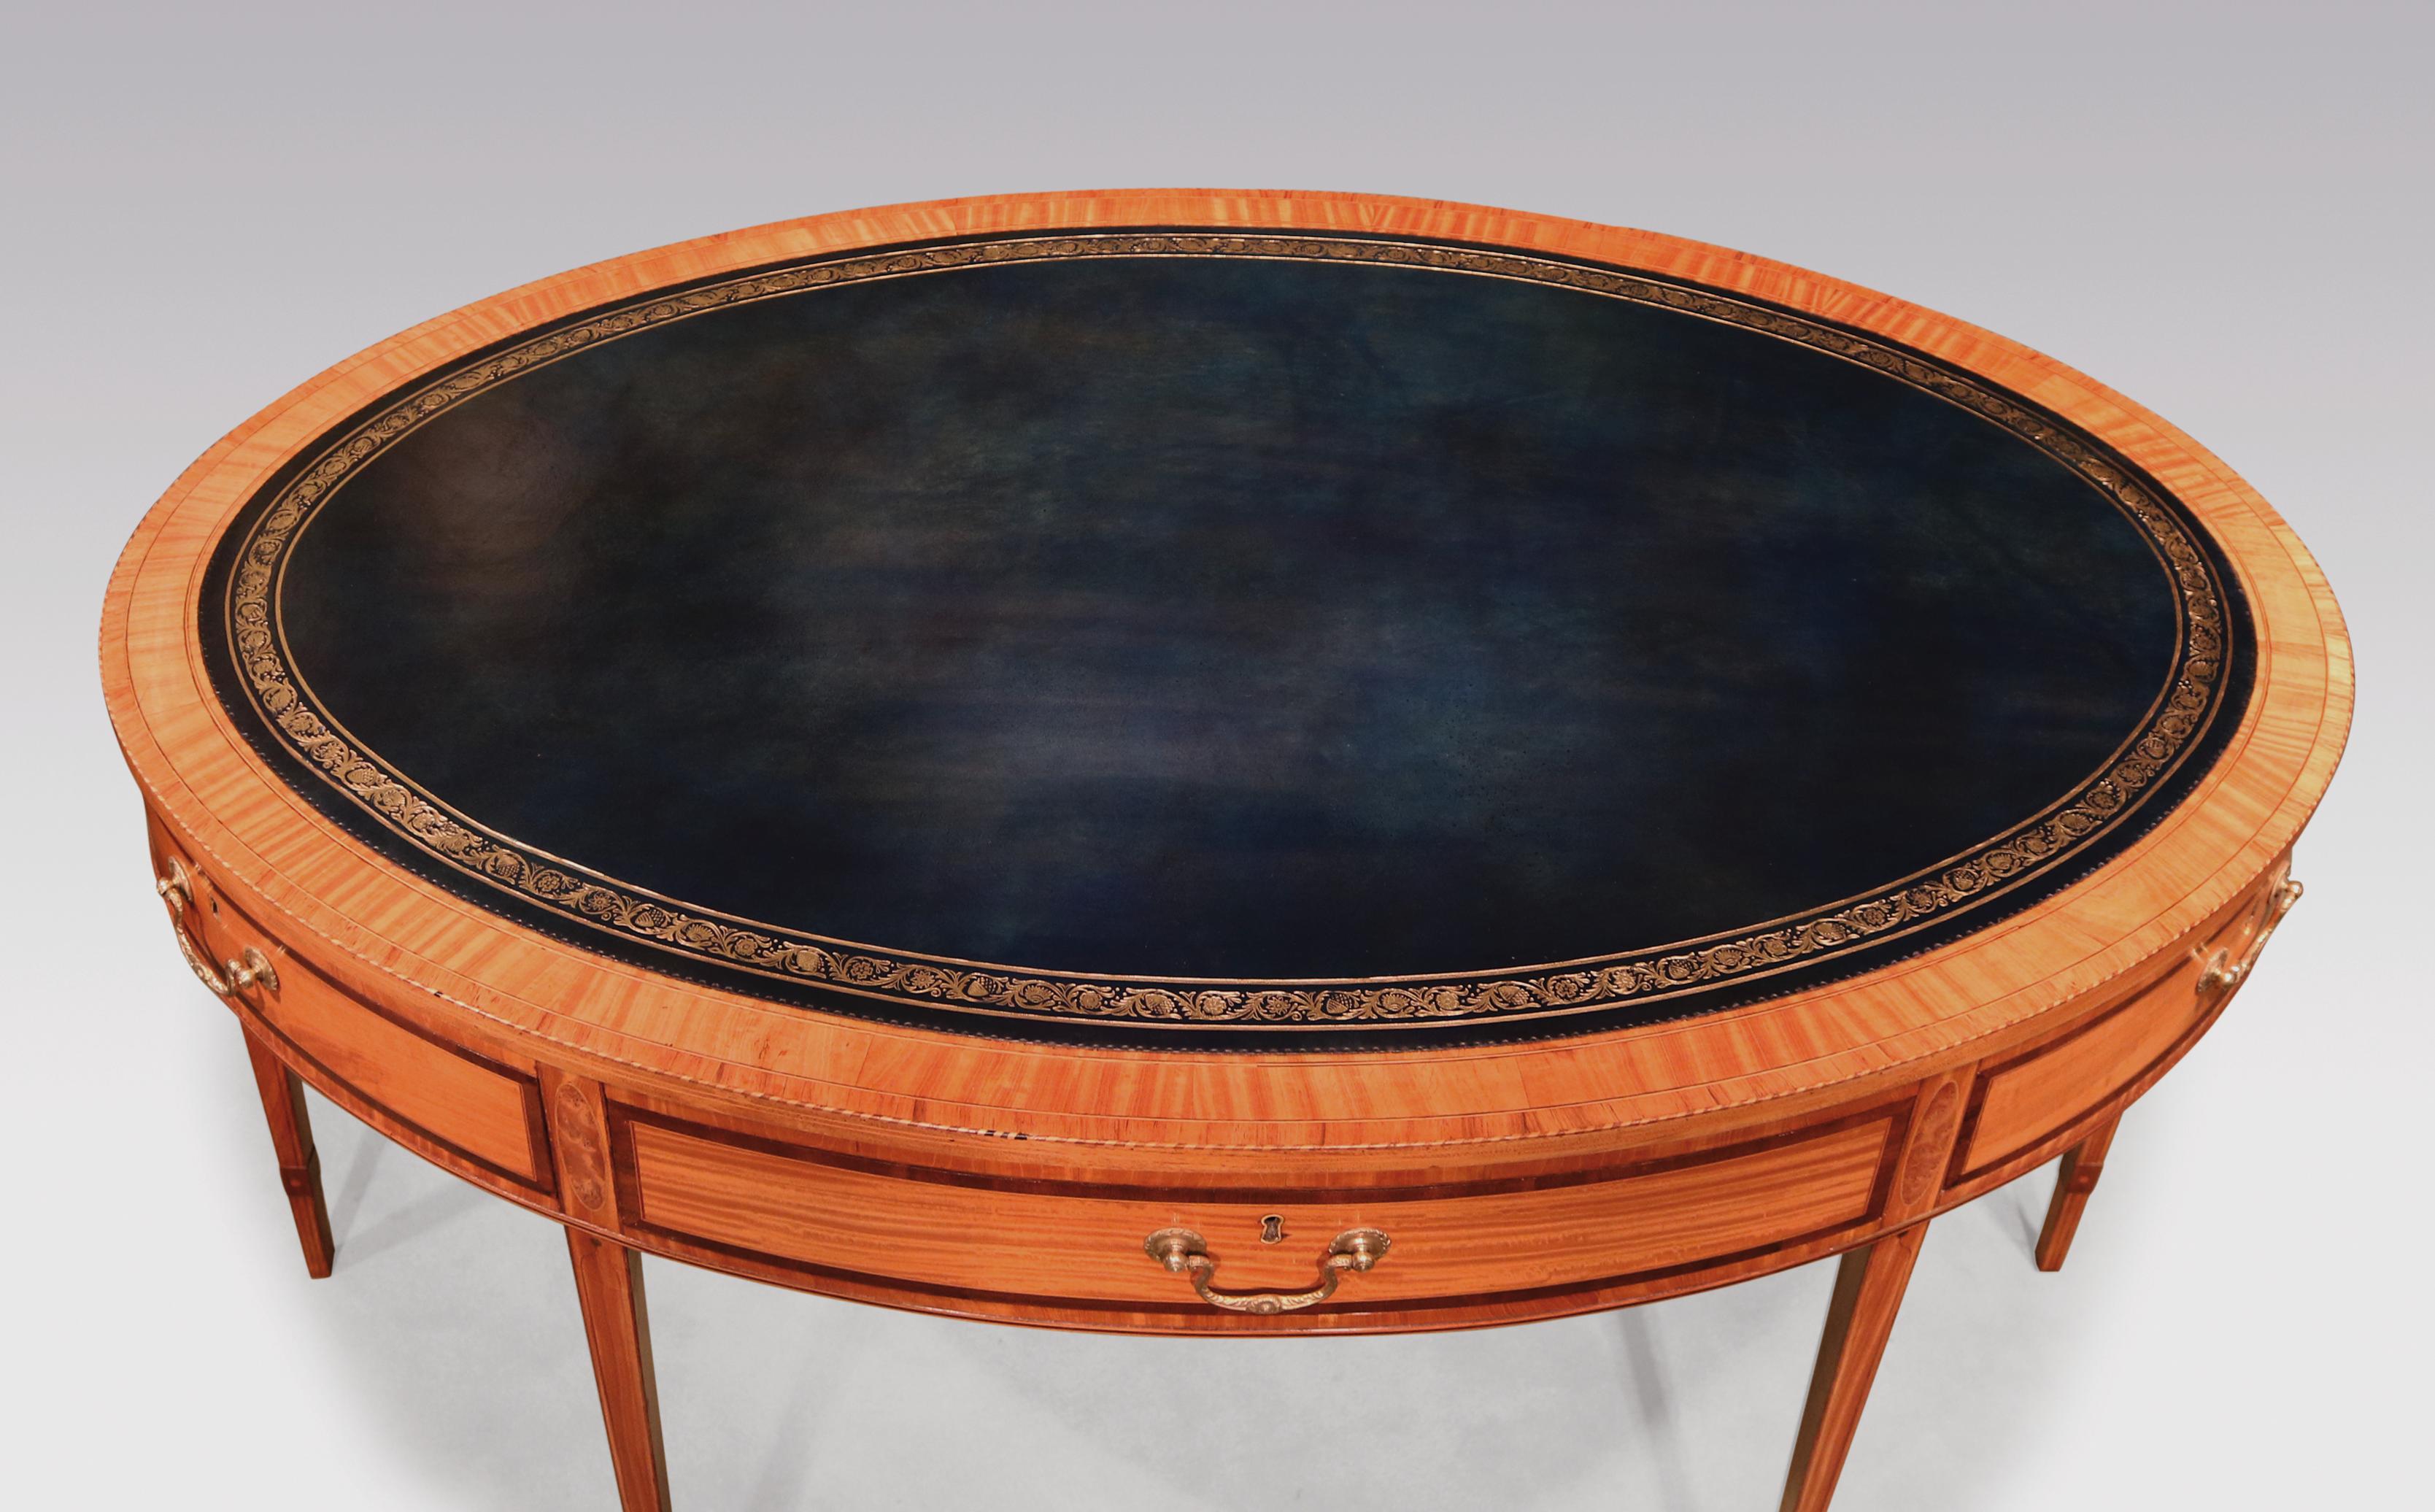 Inlay Mid-19th Century Satinwood Oval Writing Table in the Sheraton Manner